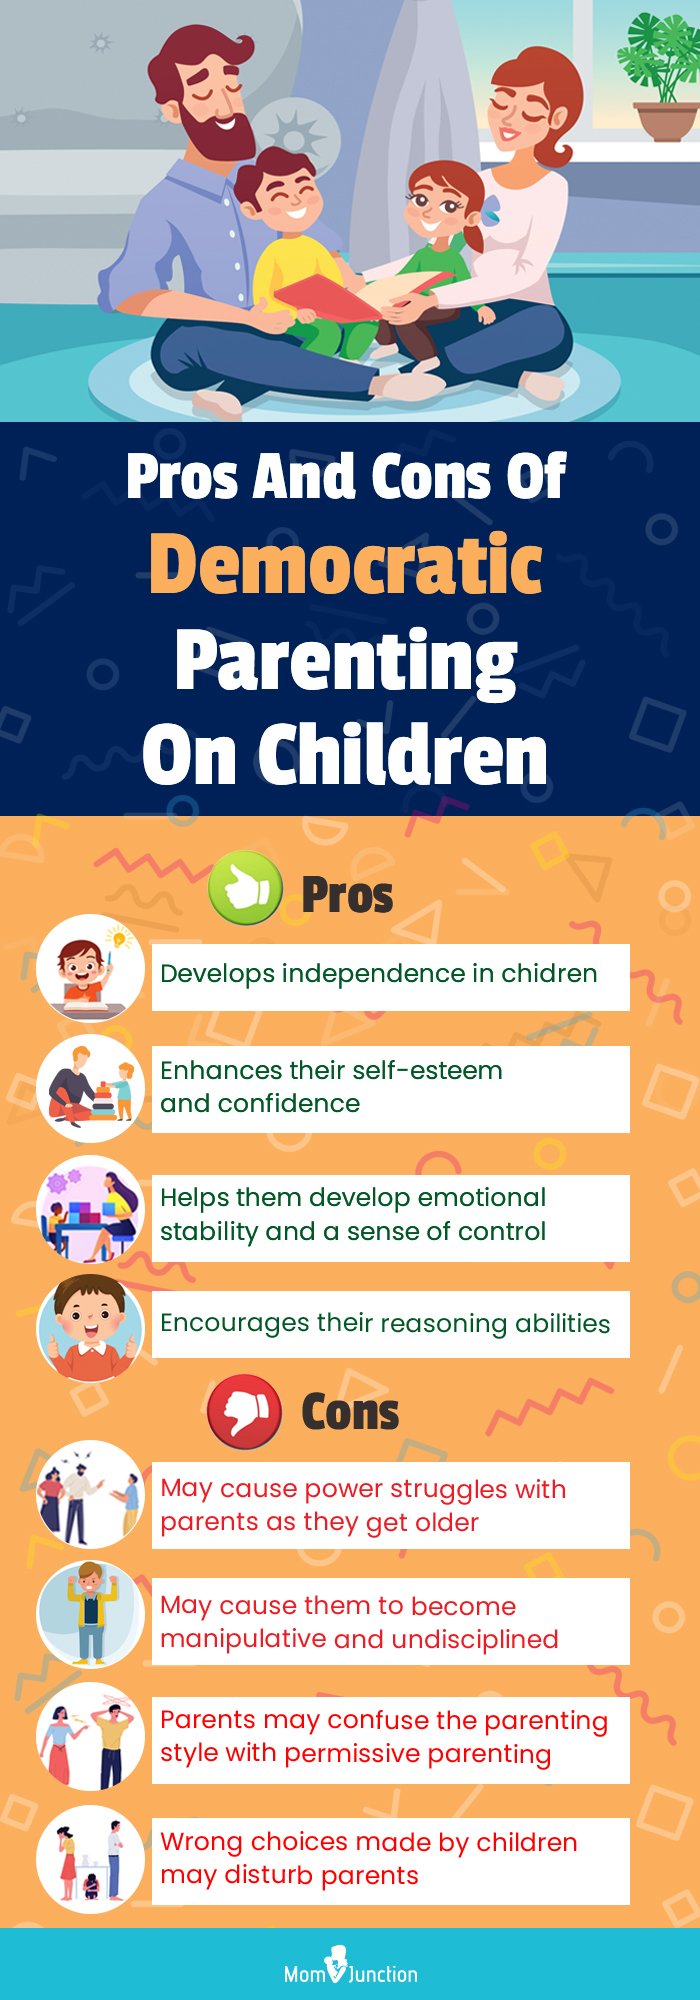 pro and cons of democratic parenting on children (infographic)